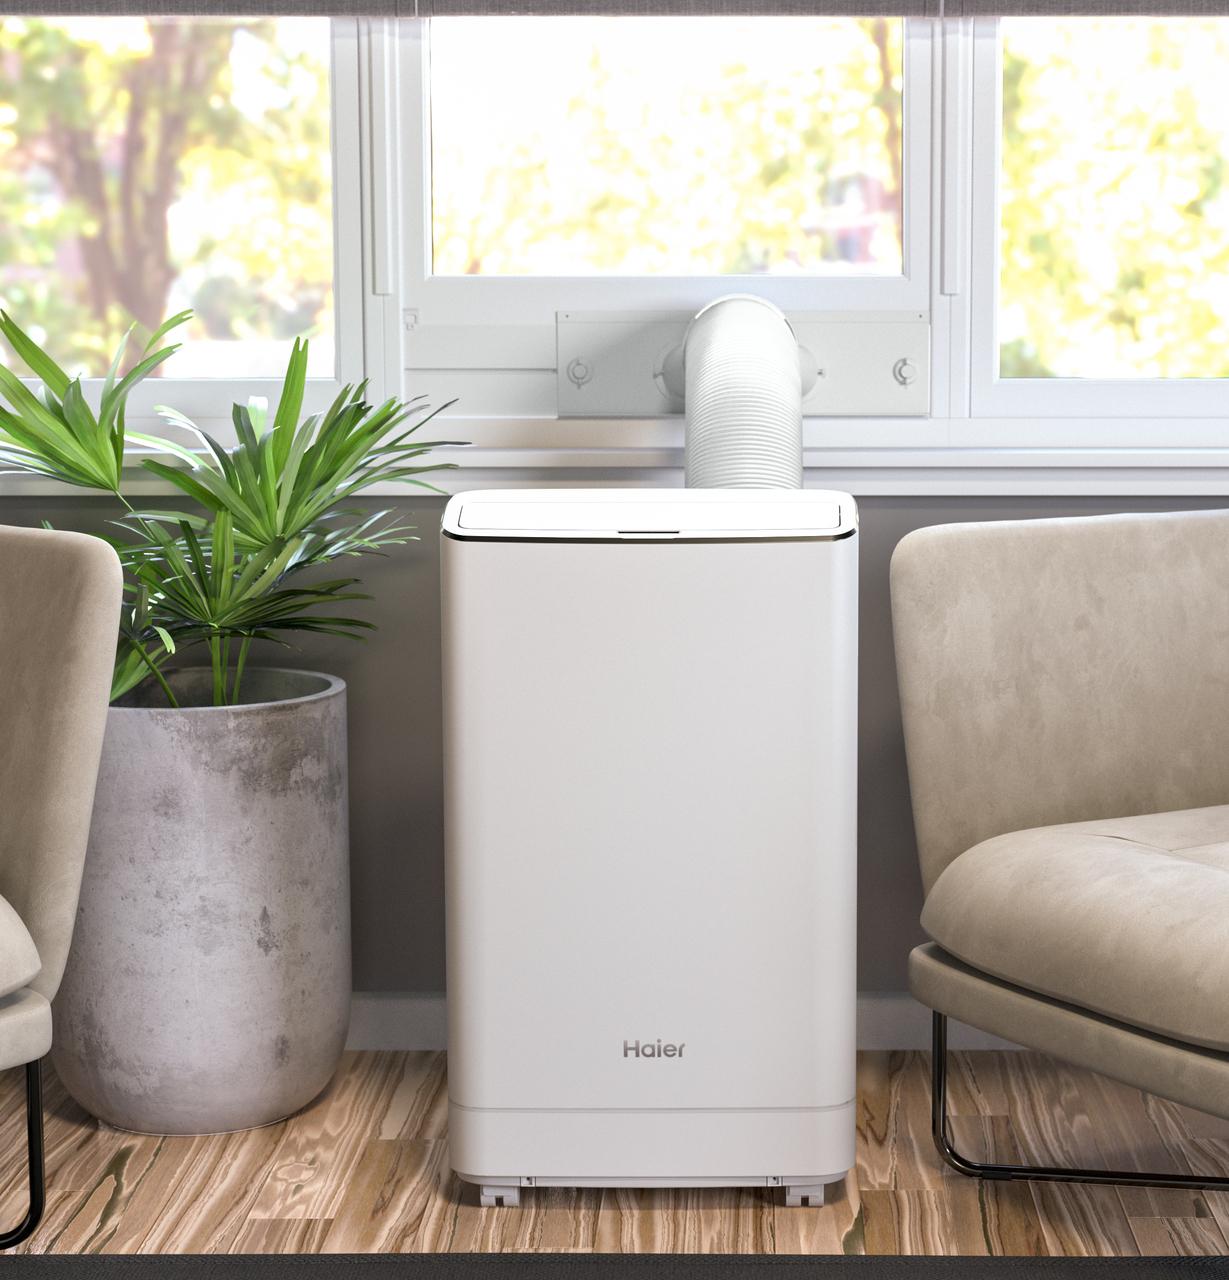 Haier® Portable Air Conditioner with Dehumidifier for Large Rooms up to 550 sq. ft., 13.500 BTU (9,700 BTU SACC)